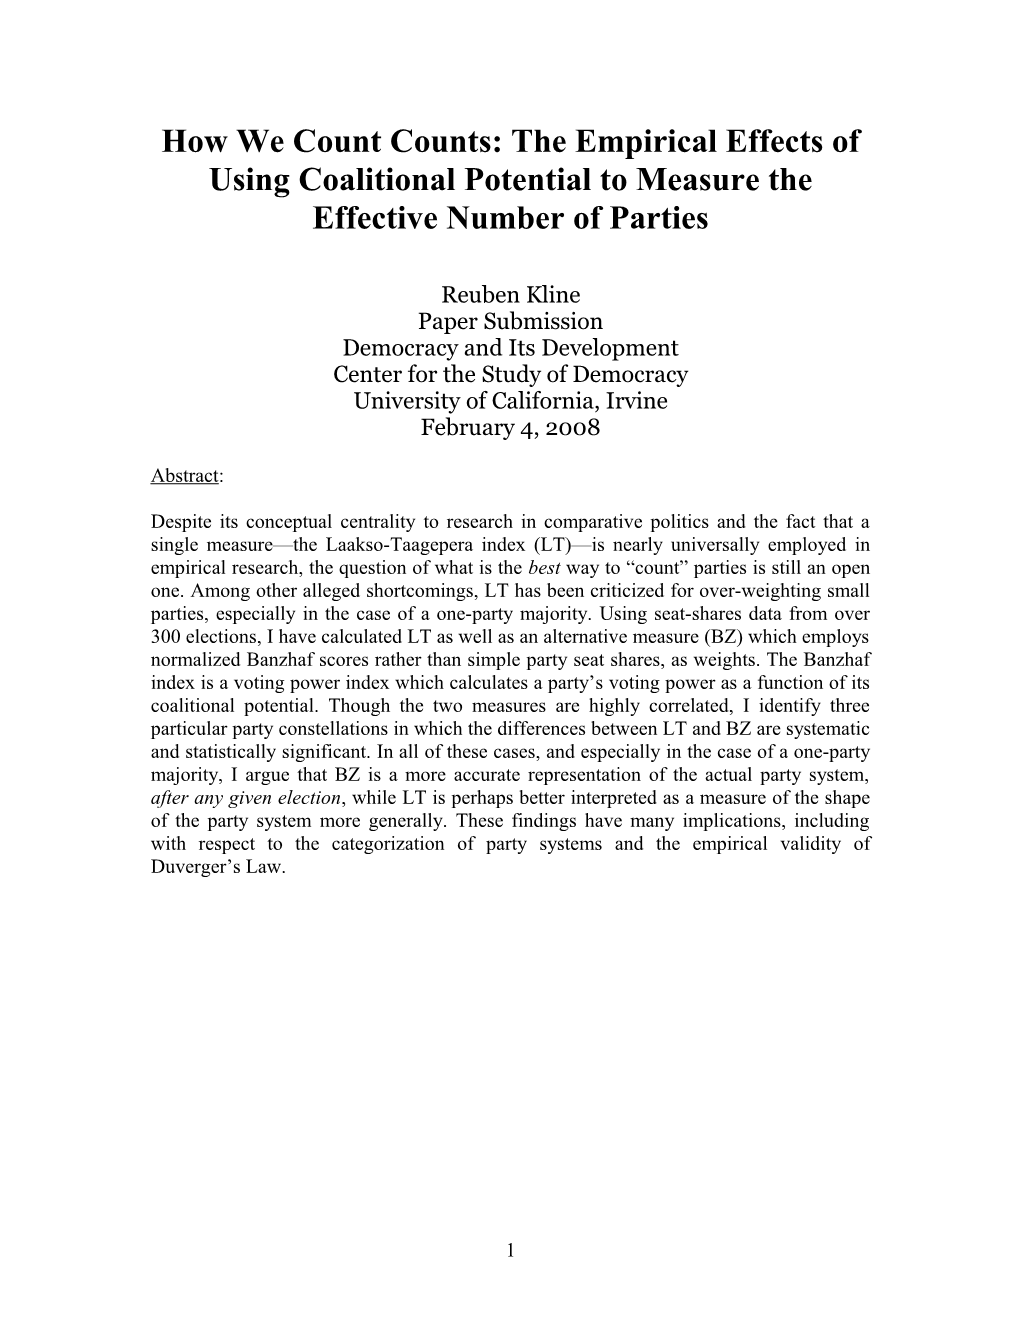 How We Count Counts: the Empirical Effects of Using Coalitional Potential to Measure The